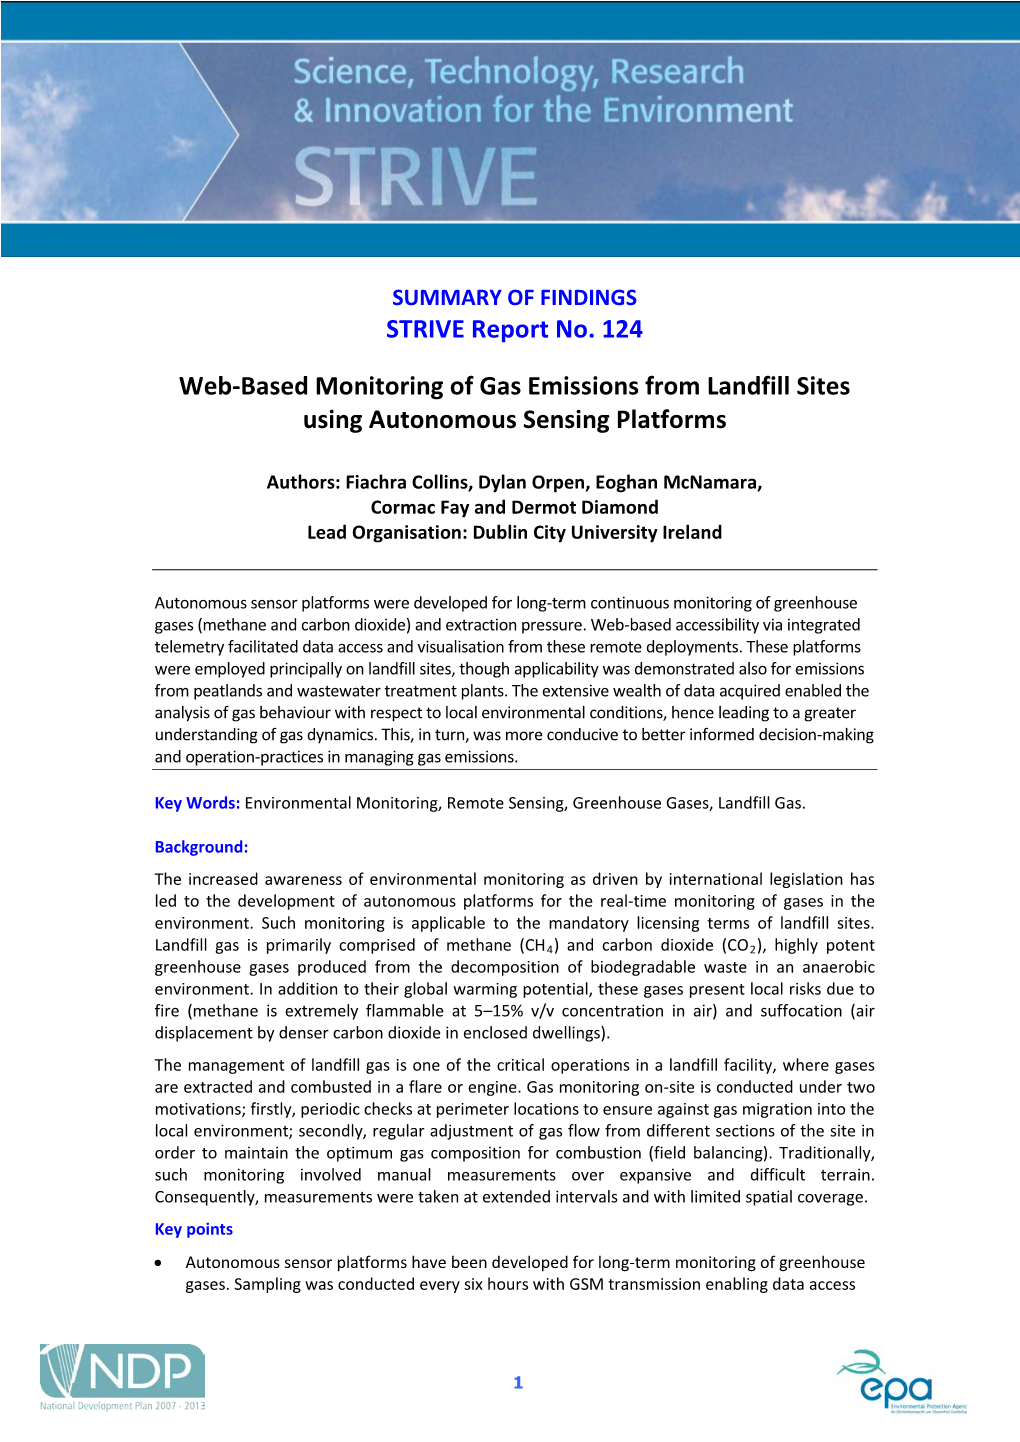 Web-Based Monitoring of Gas Emissions from Landfill Sites Using Autonomous Sensing Platforms